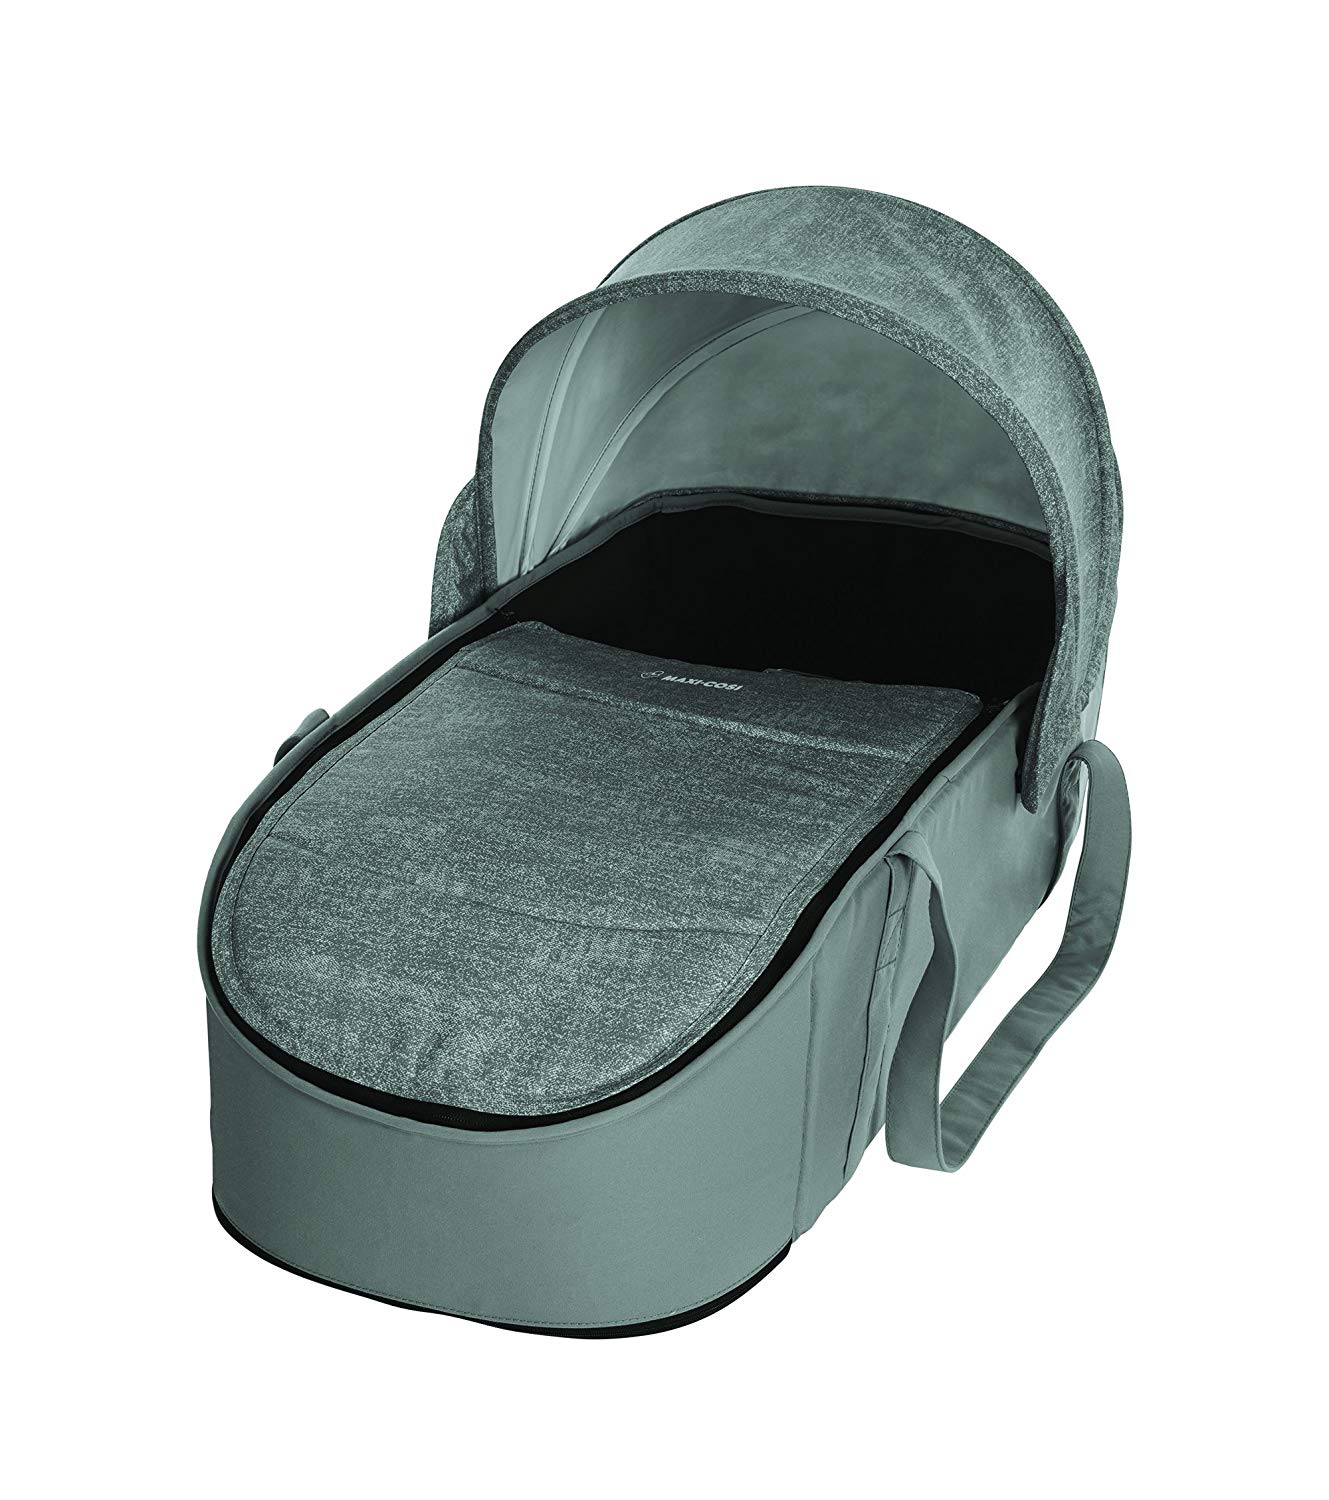 Maxi-Cosi Laika Baby Carrycot - Very Light (Only 1.5 kg) and Padded Soft Pram Attachment - Fits Maxi-Cosi Laika Pushchair - Baby Carrier Suitable from Birth - Nomad Grey